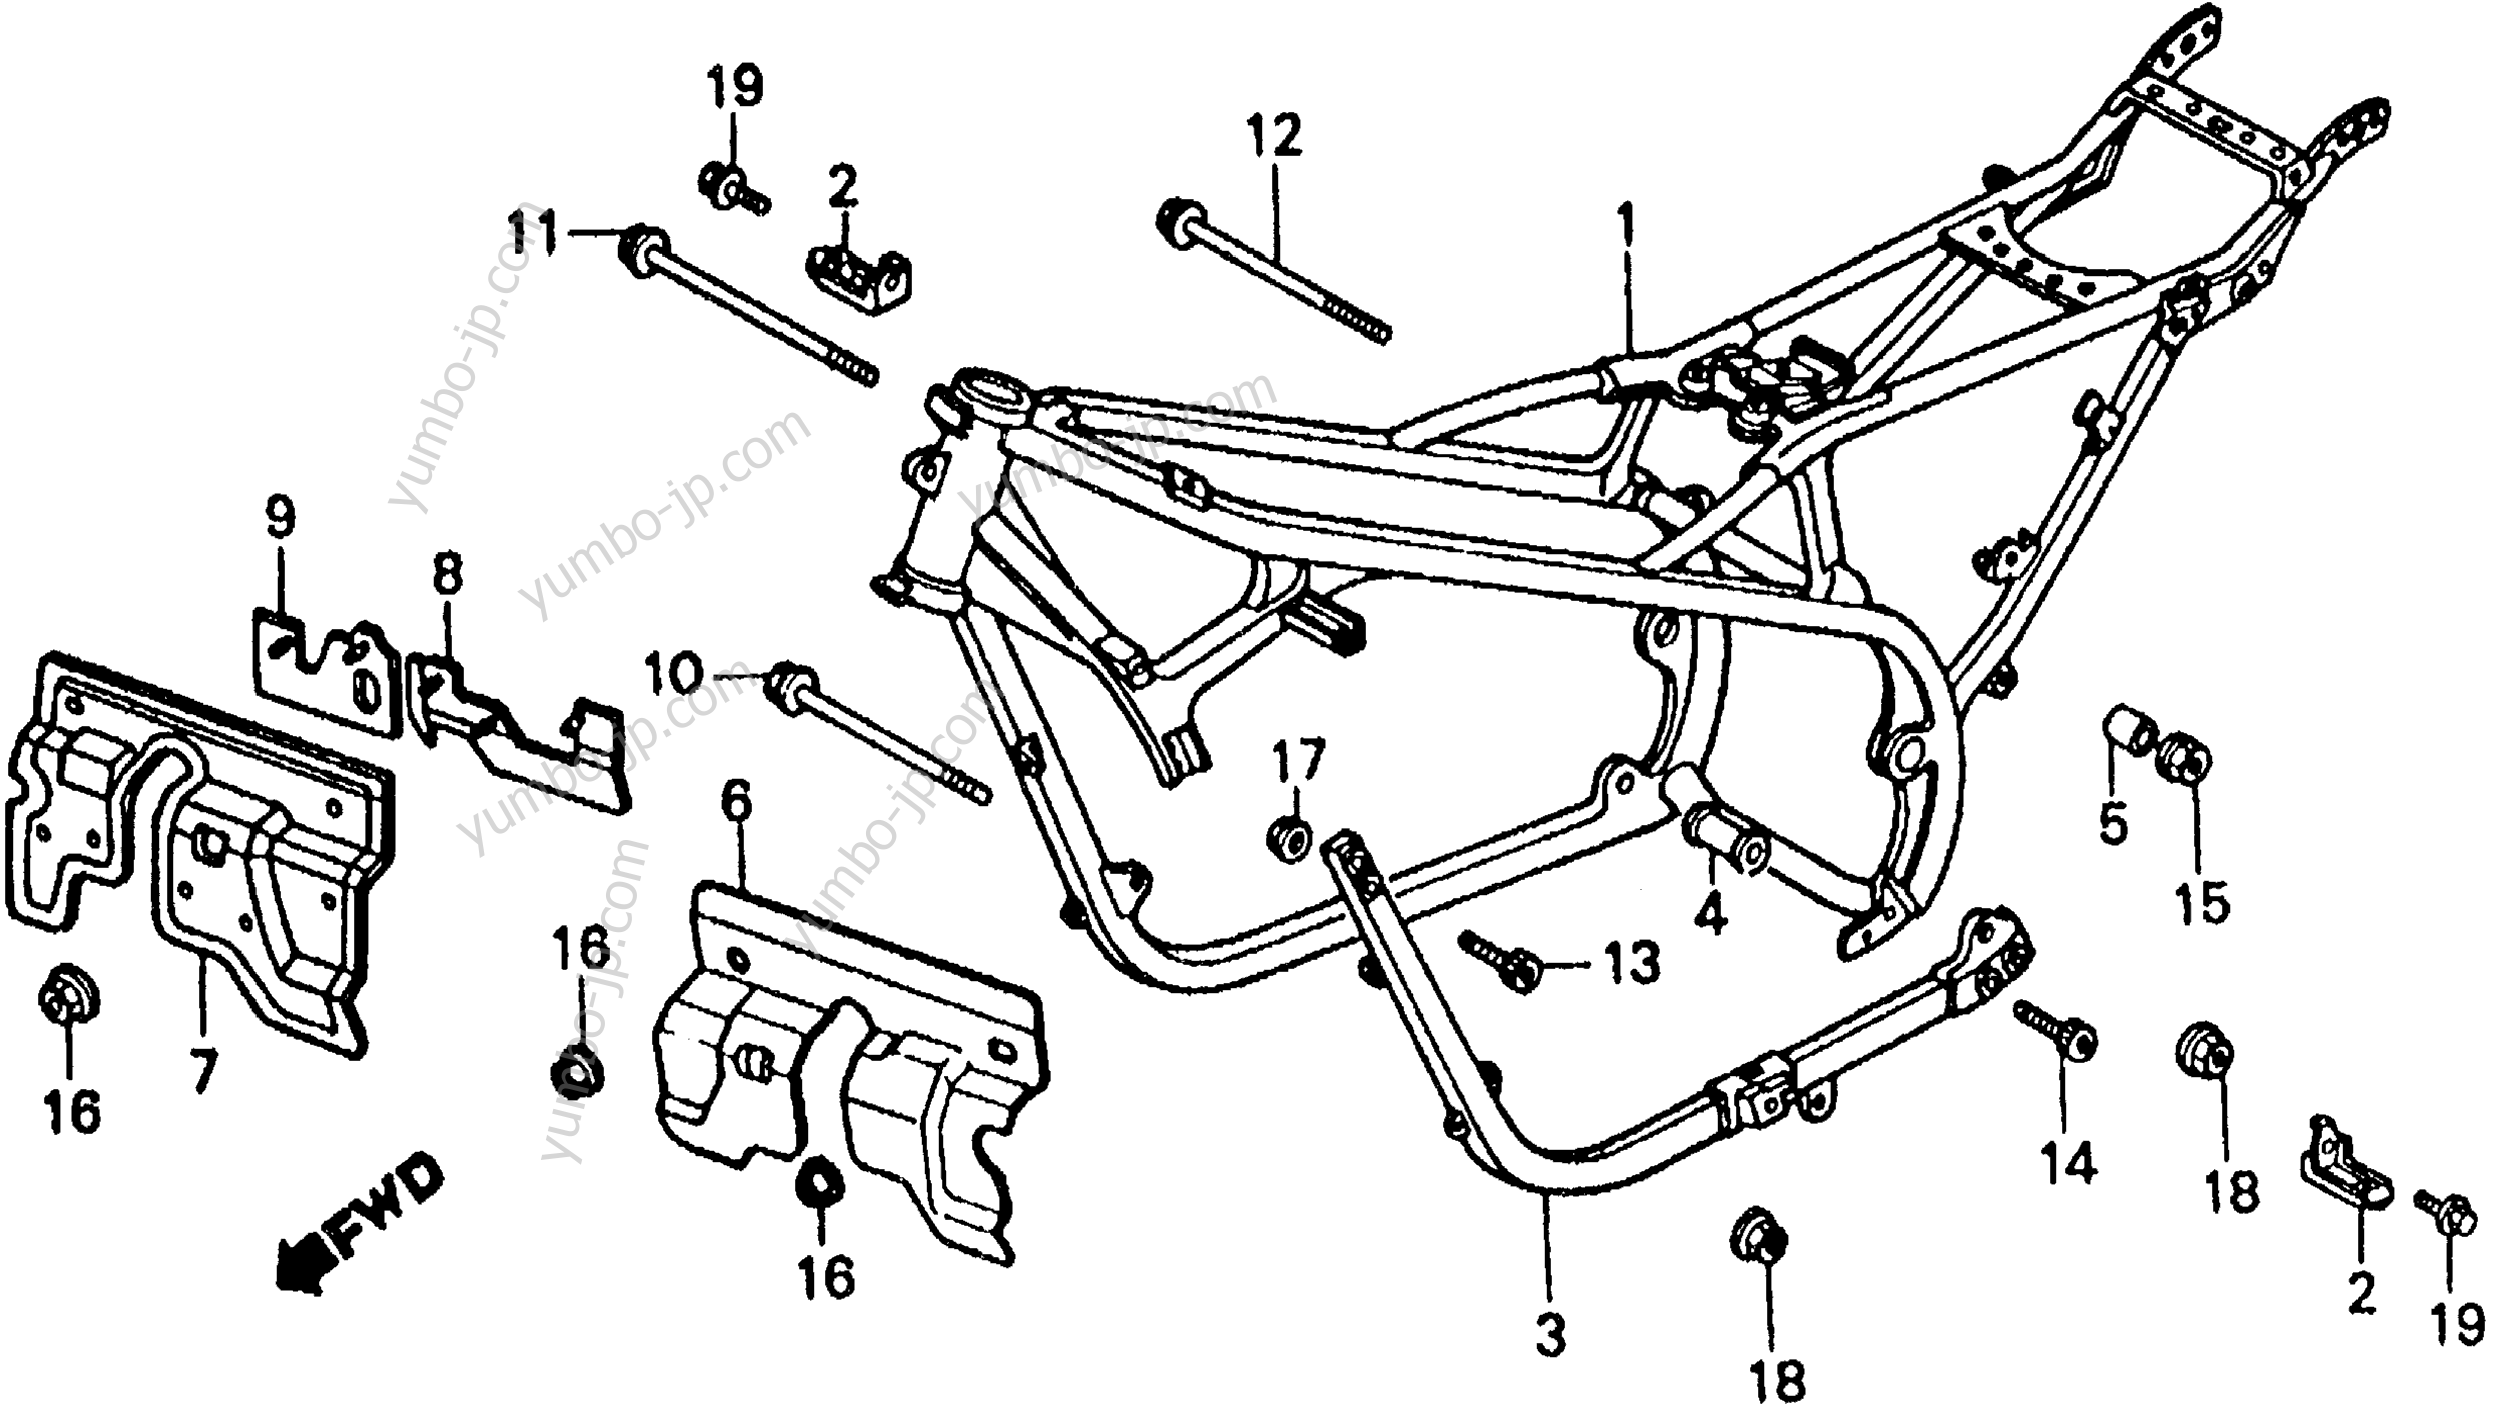 FRAME for motorcycles HONDA VF500F AC 1986 year